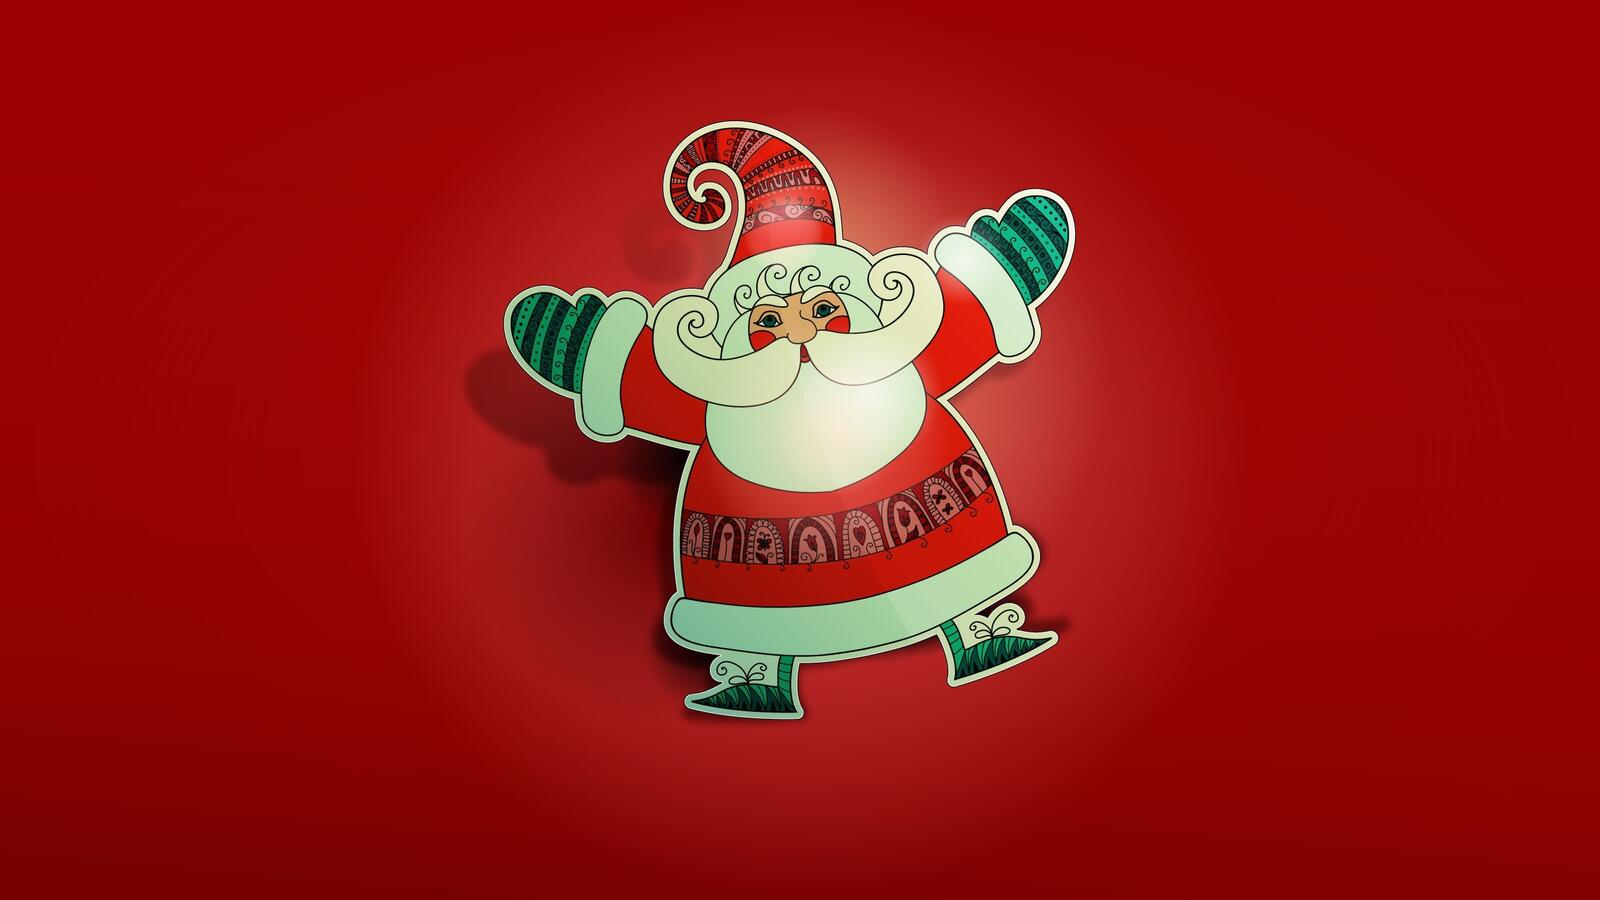 Wallpapers Santa Claus background red on the desktop